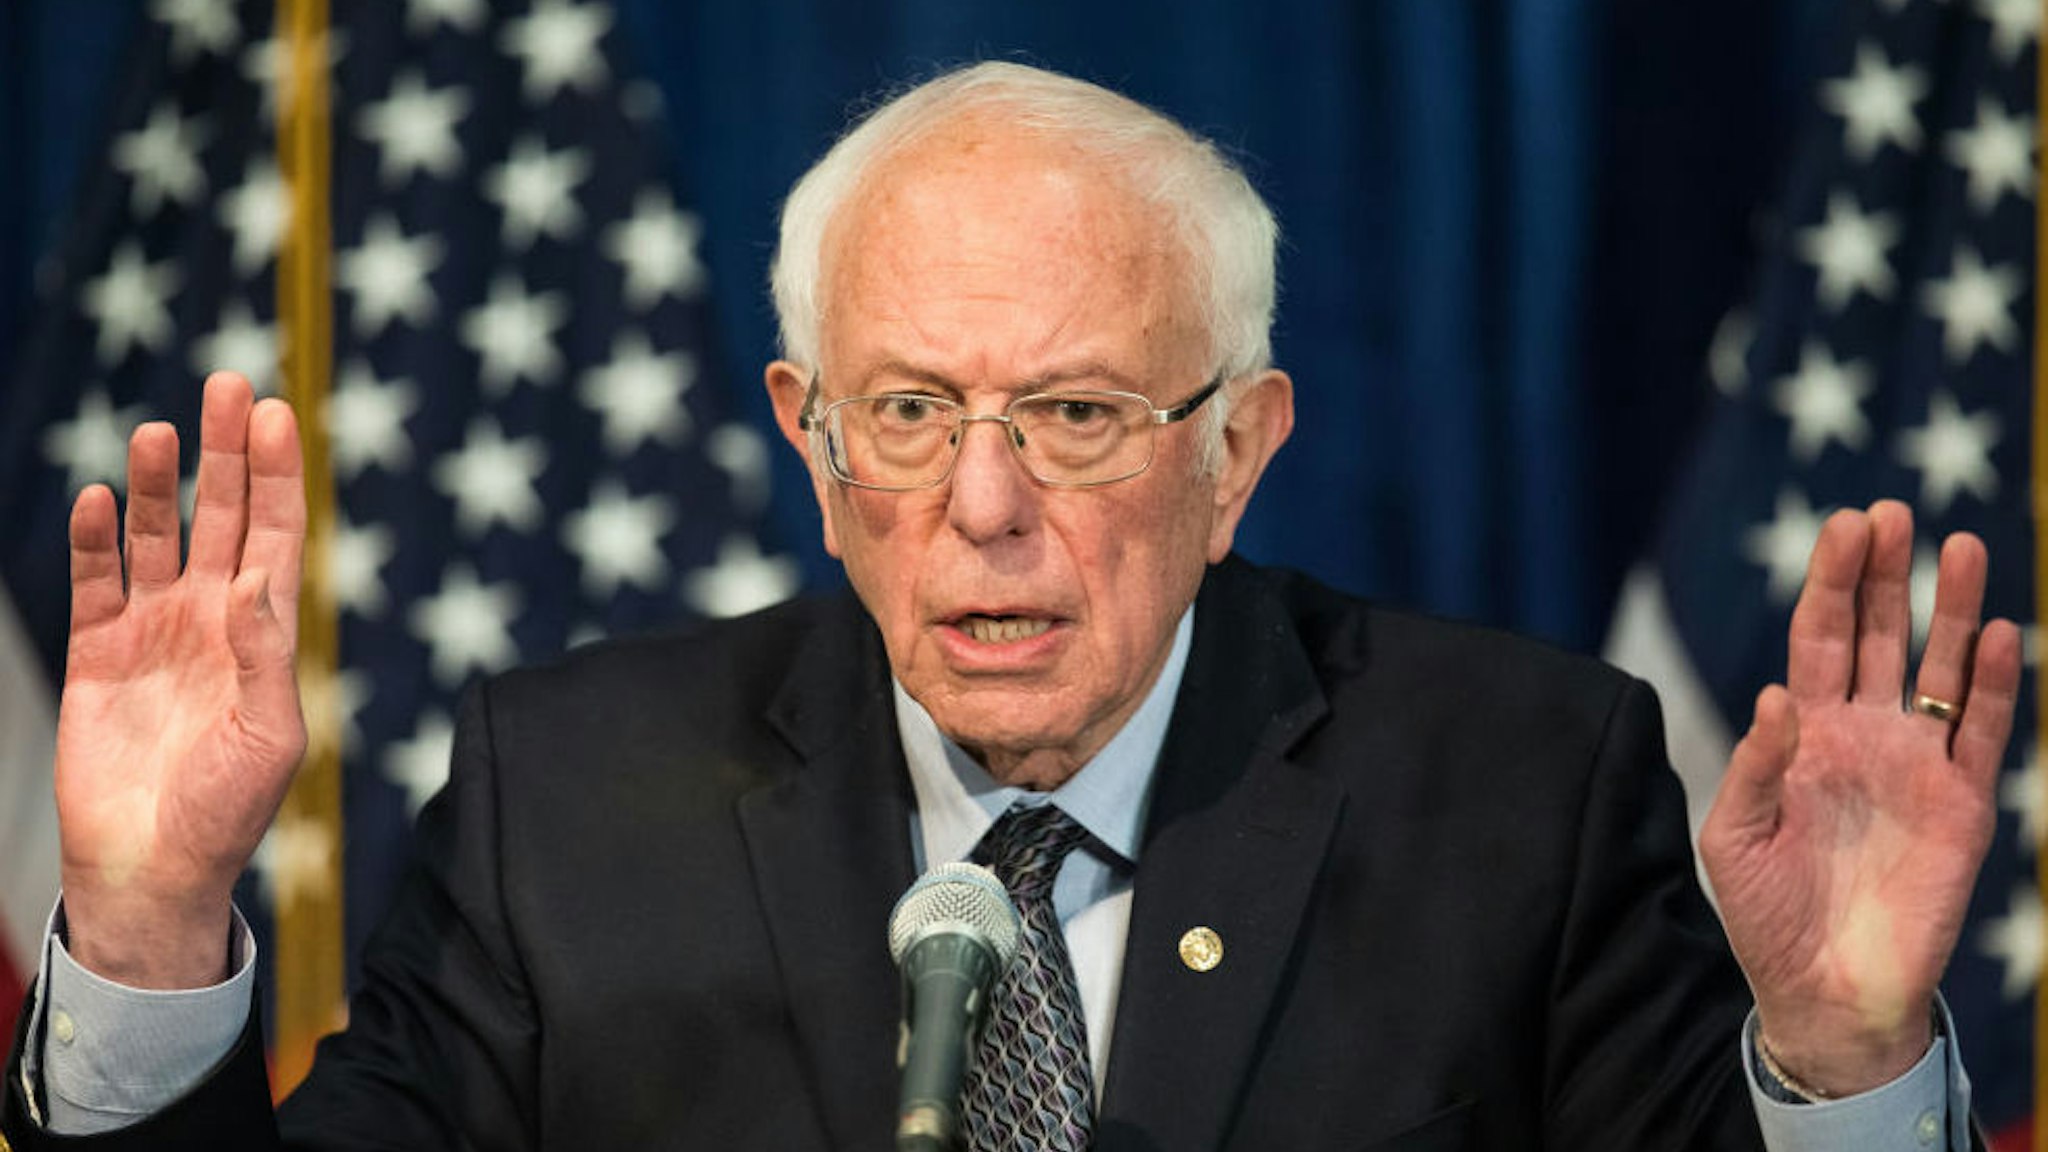 Democratic presidential candidate Sen. Bernie Sanders (I-VT) delivers a campaign update at the Hotel Vermont on March 11, 2020 in Burlington, Vermont.